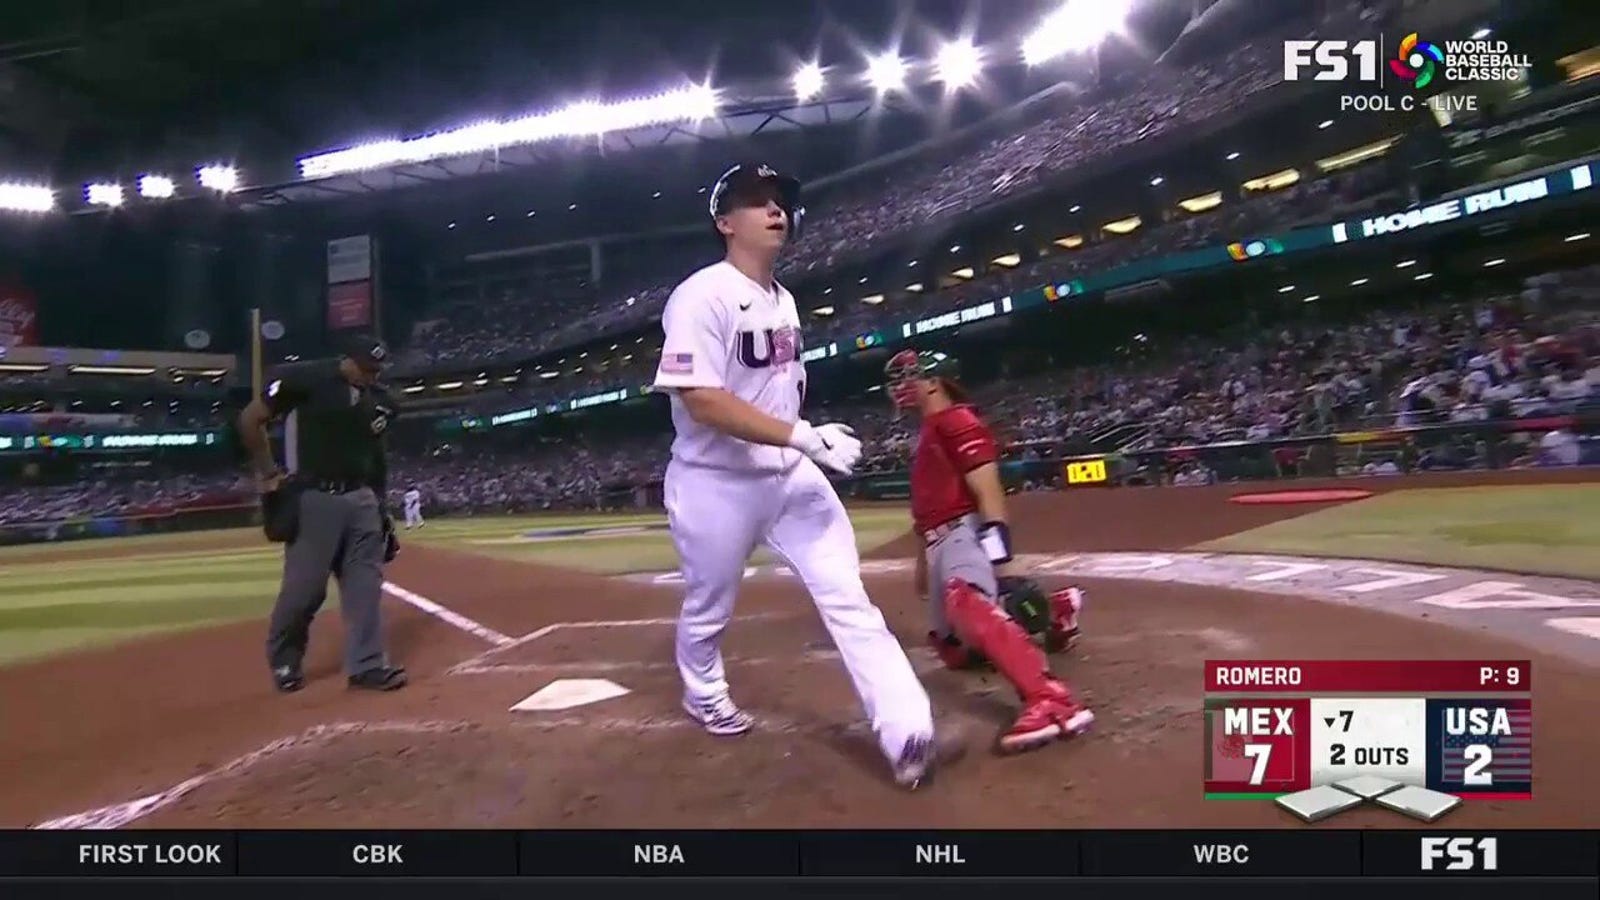 Team USA's Will Smith hits a solo home run to bring the deficit to 7-2 in favor of Mexico